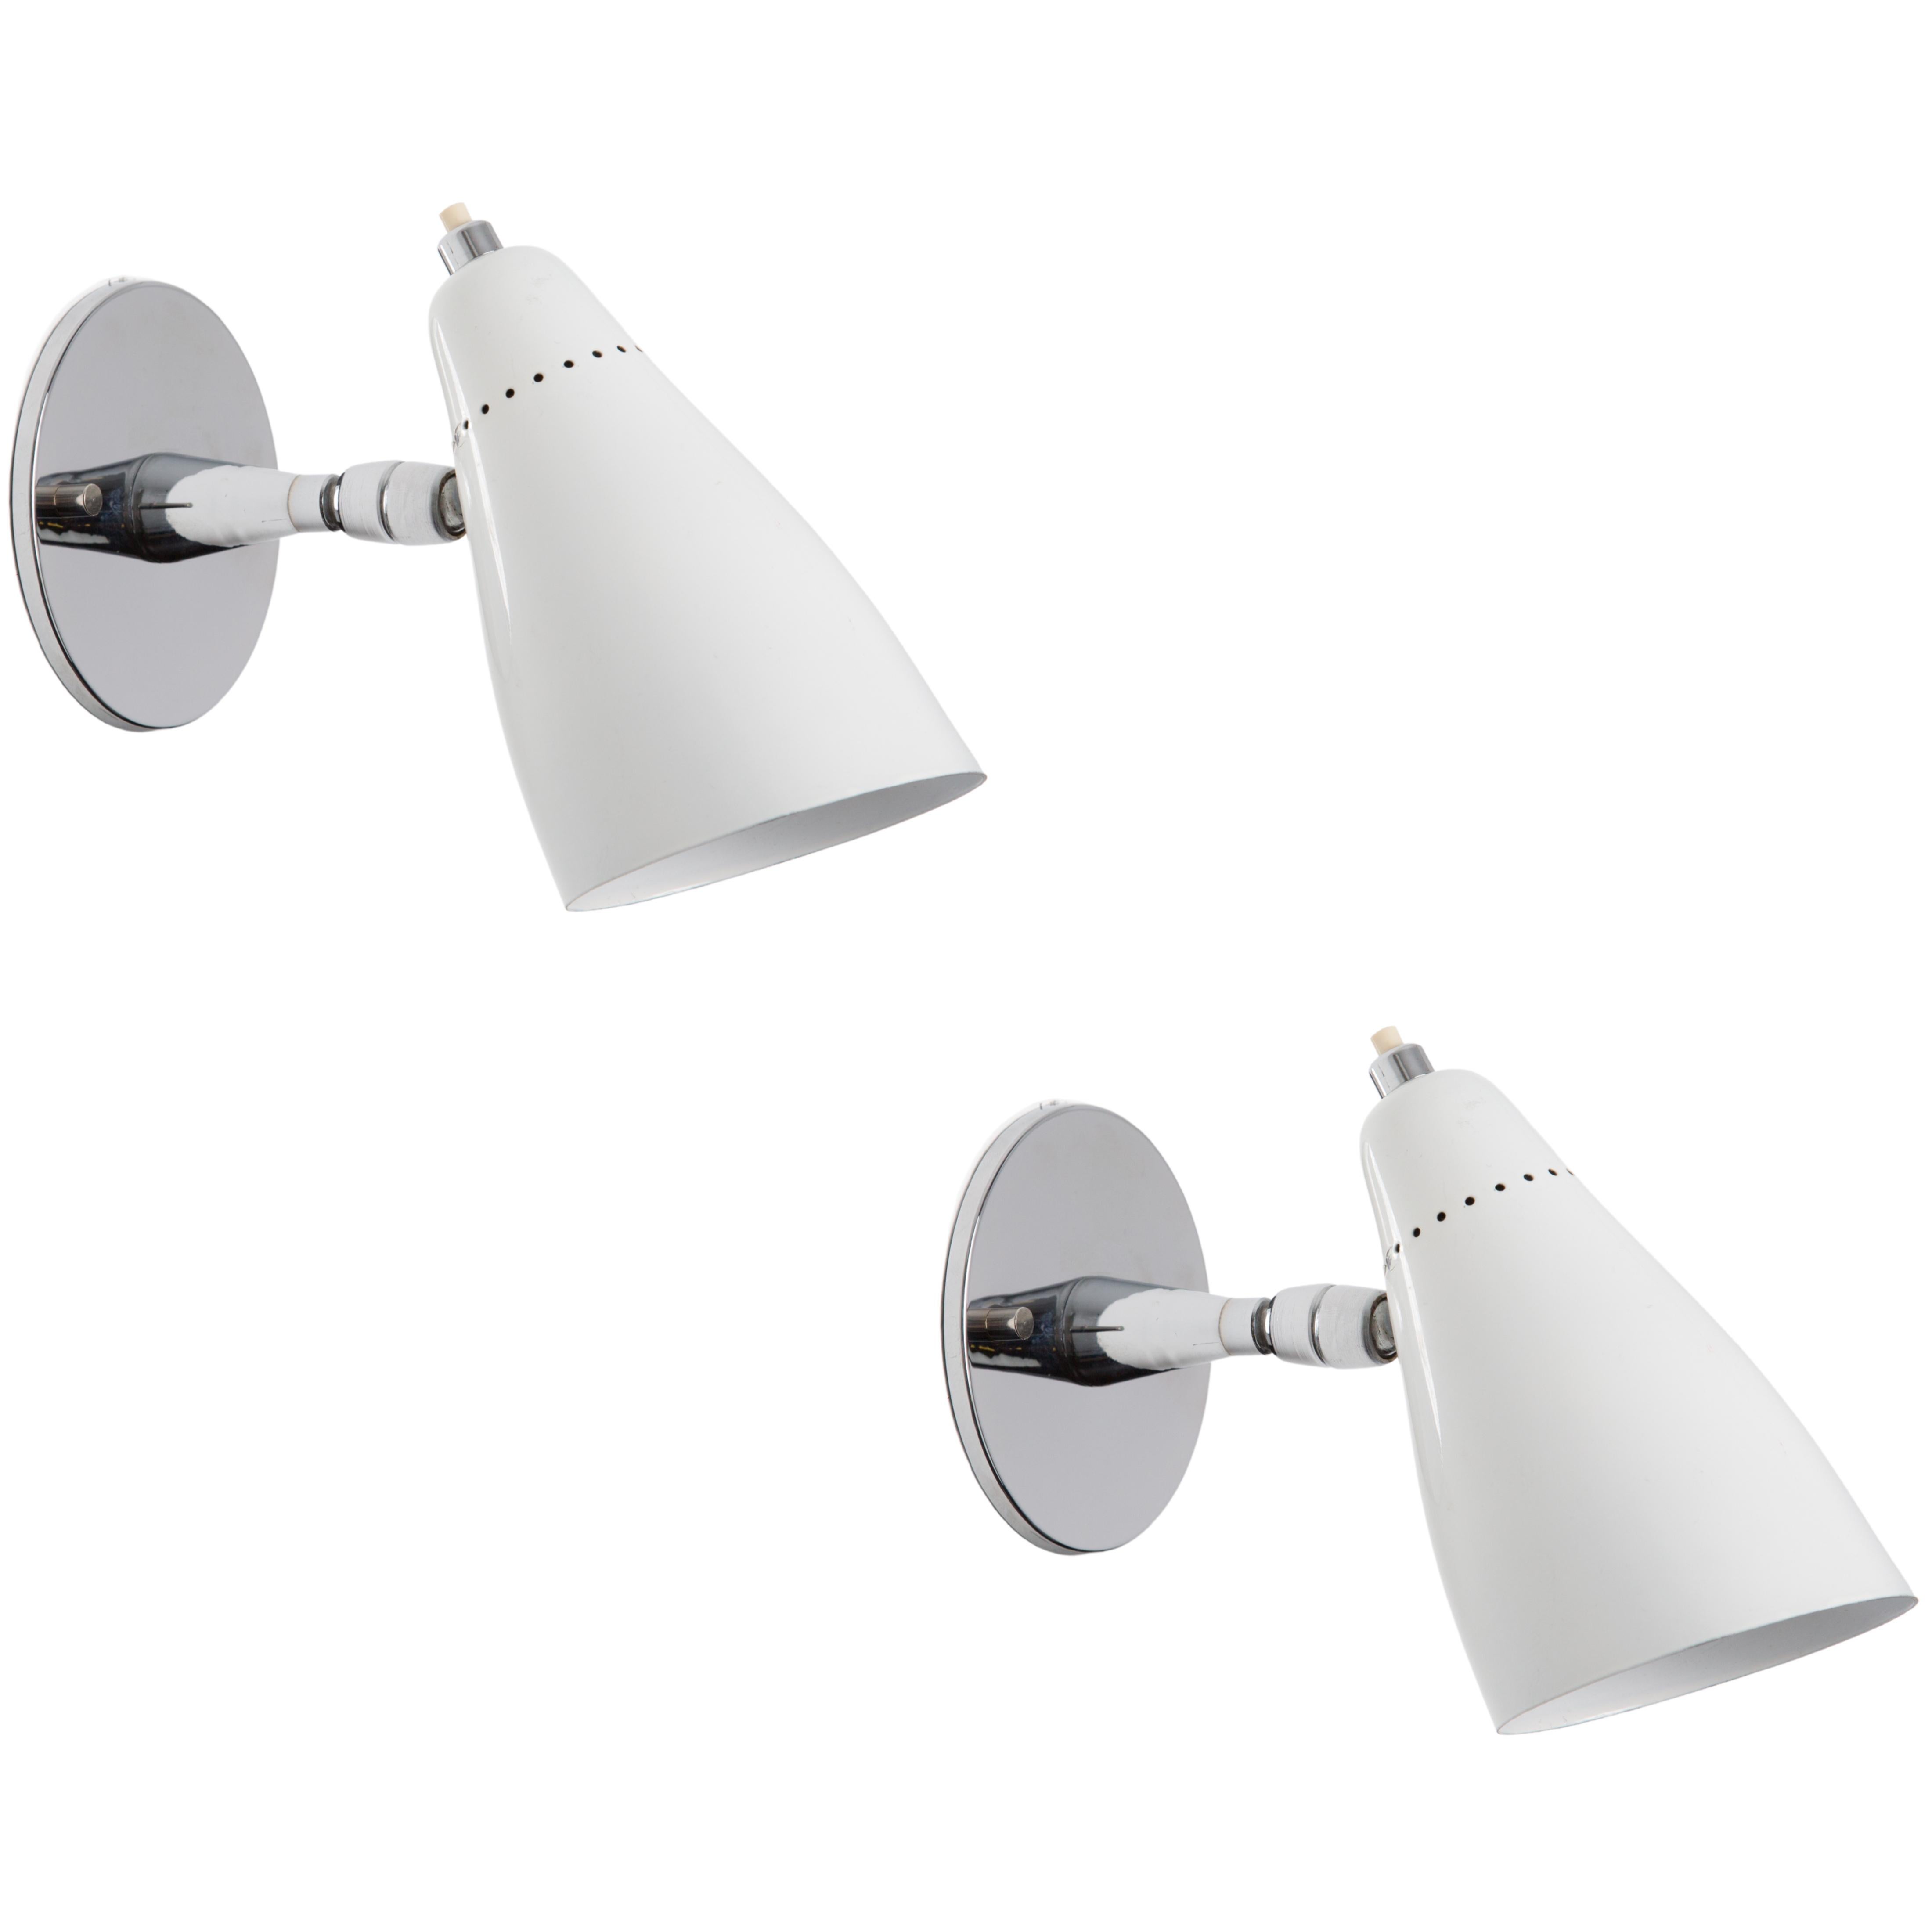 1960s Giuseppe Ostuni Model #101 white articulating sconce for O-Luce. Executed in polished chrome and a white painted perforated aluminum shade. Sconce pivots up/down and left/right. An incredibly clean and refined design by one of the Italian